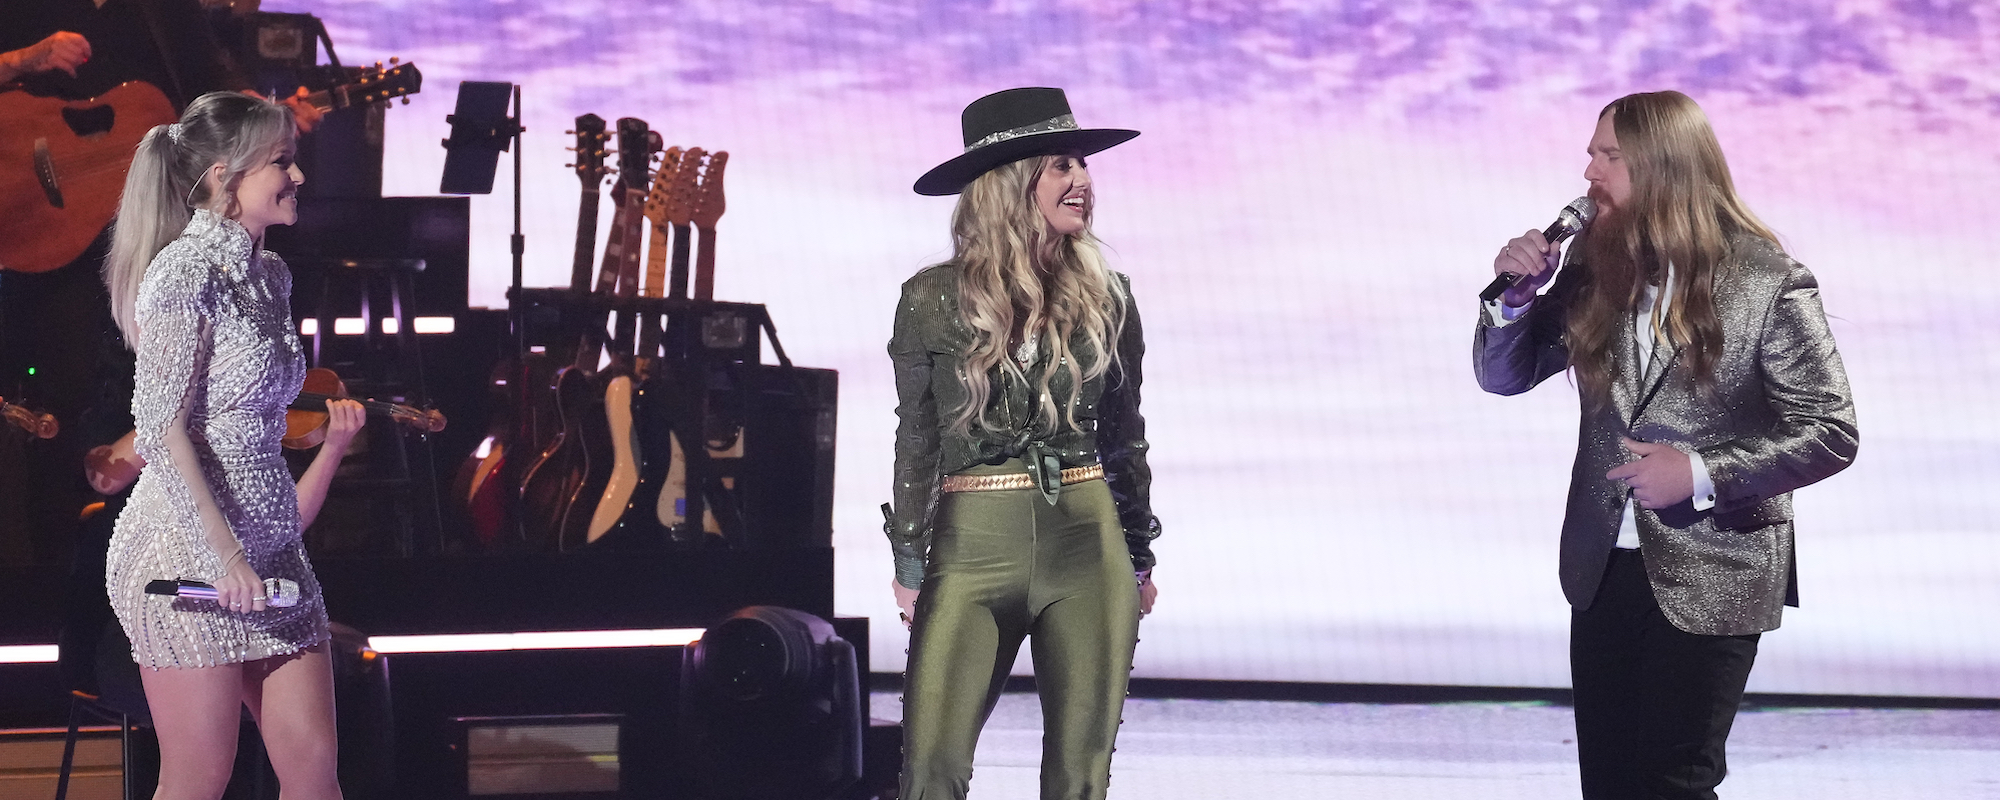 Lainey Wilson Performs with Jelly Roll, Revives “Heart Like A Truck,” on ‘American Idol’ Finale